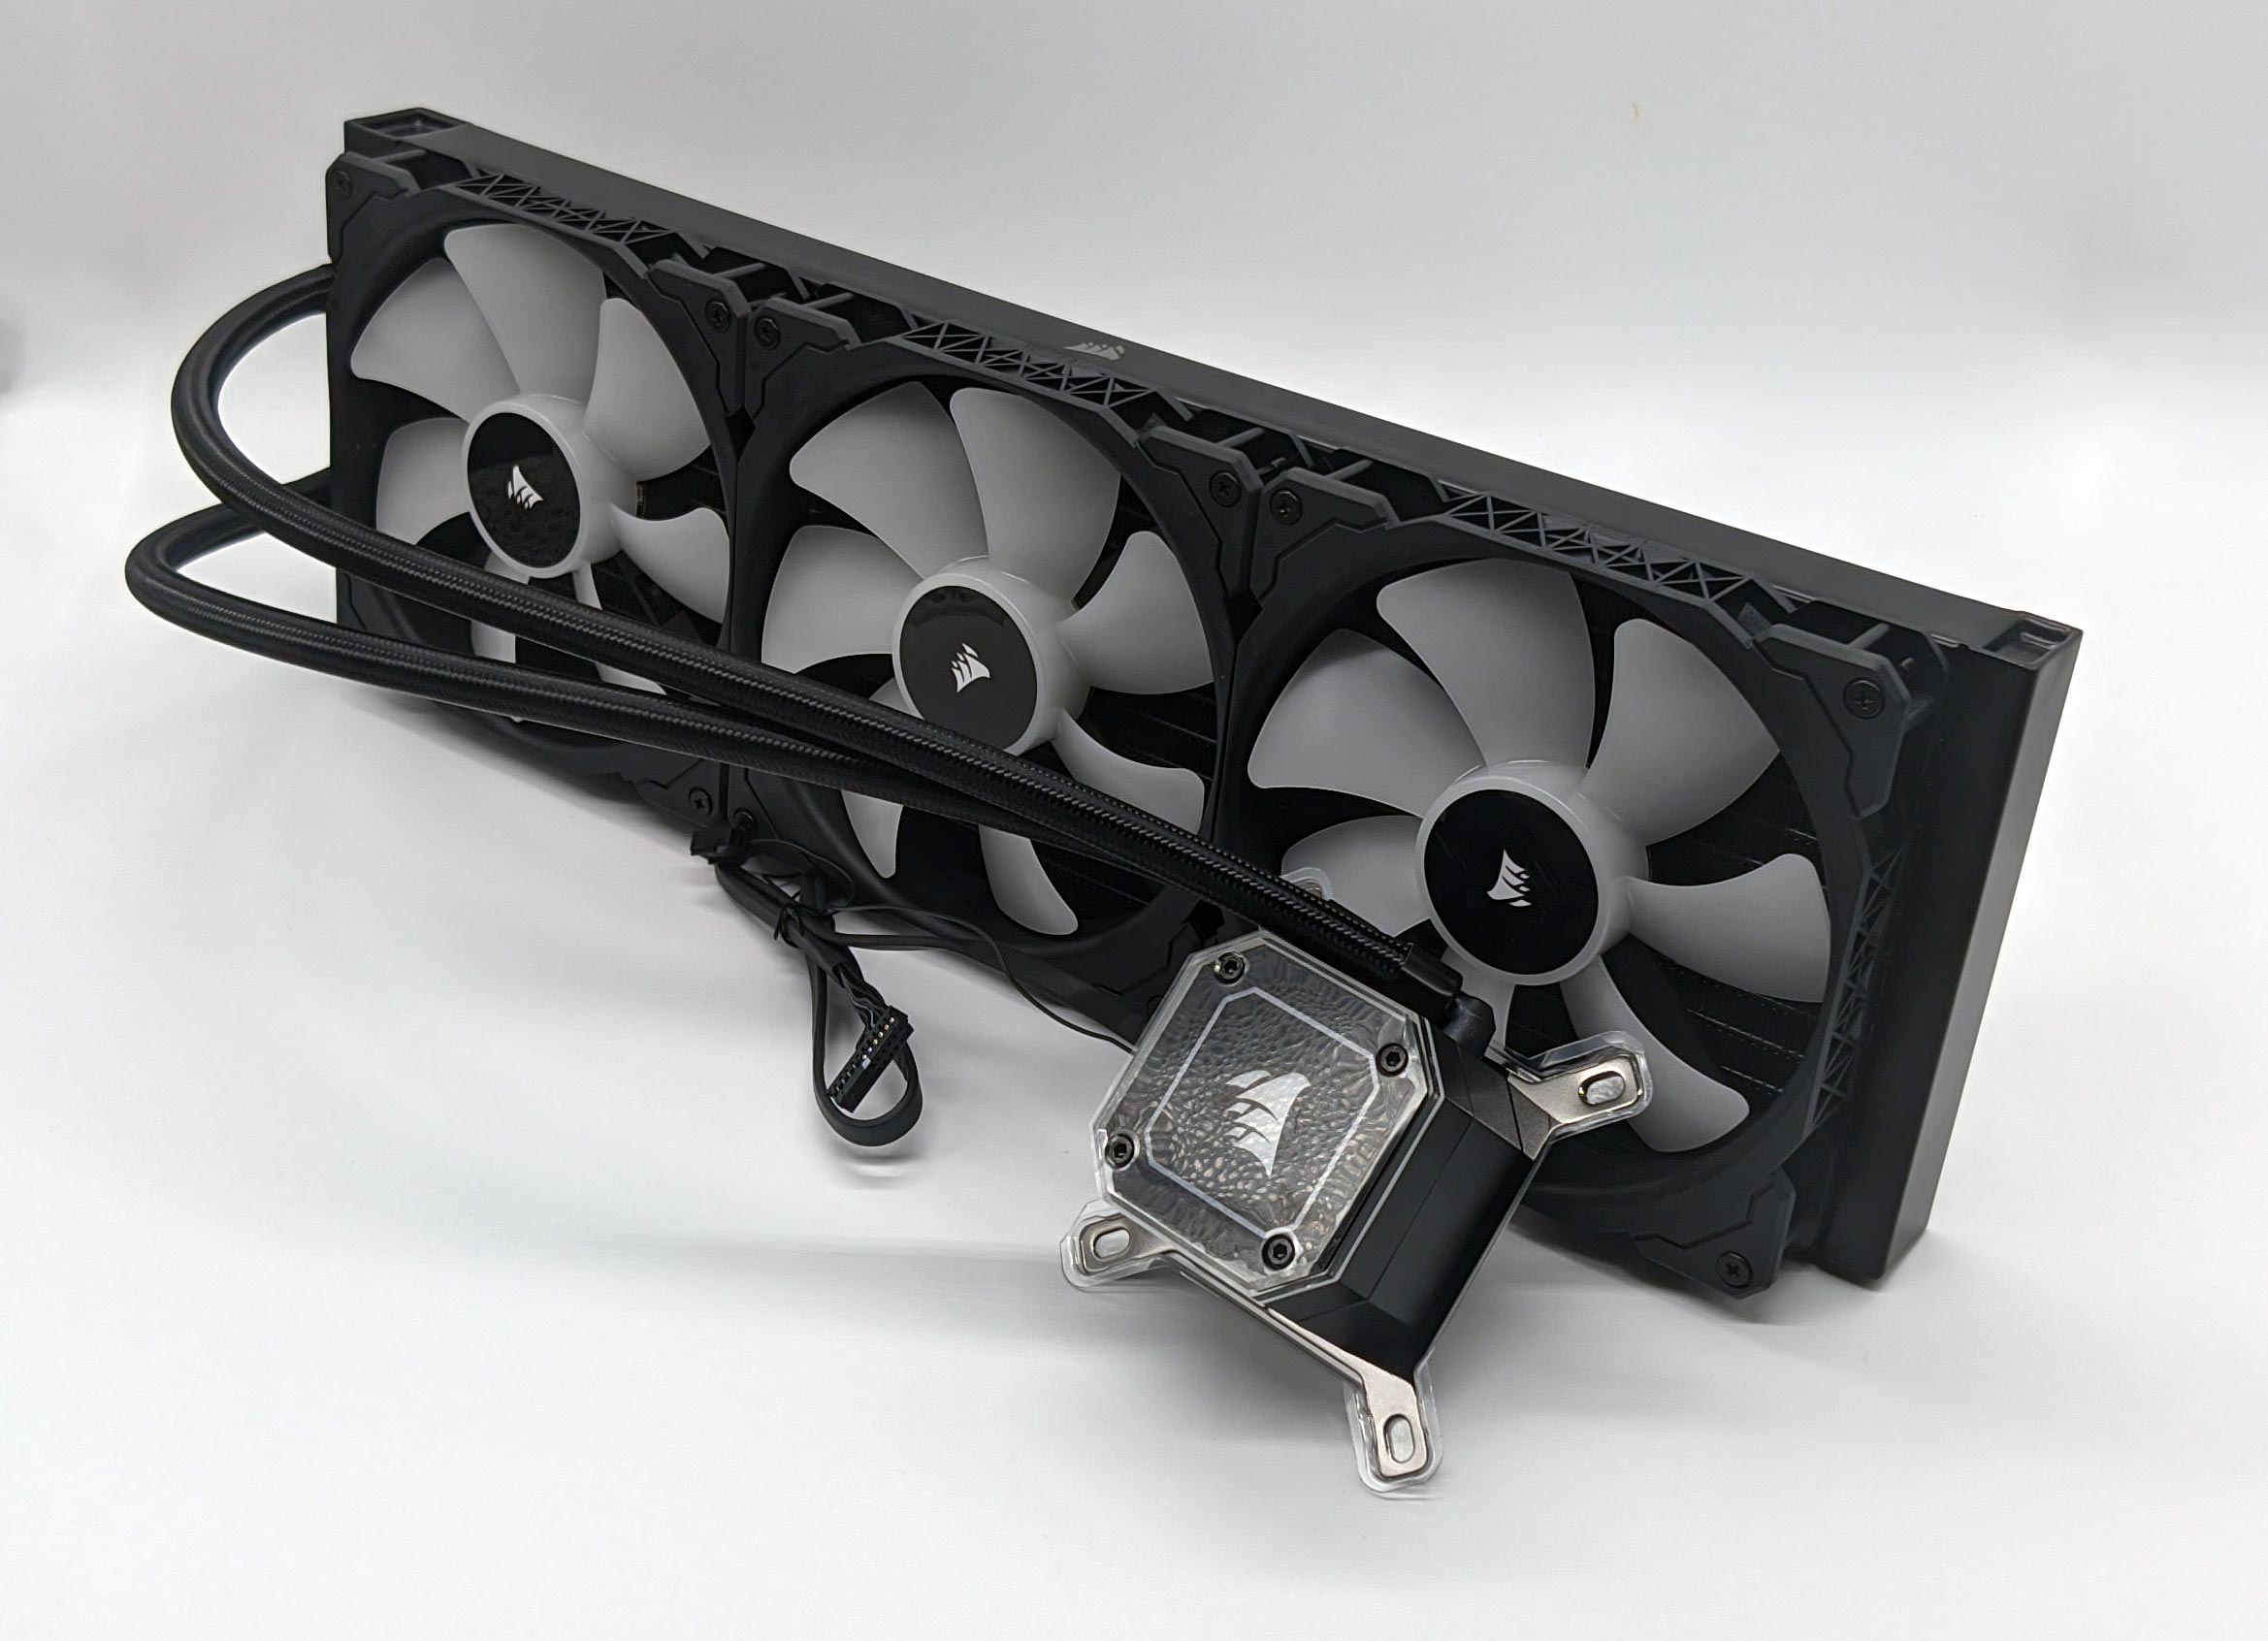 Corsair H170i ELITE CAPELLIX All-in-One CPU water cooler put to the test - How does the oversized 420 mm monster fare?